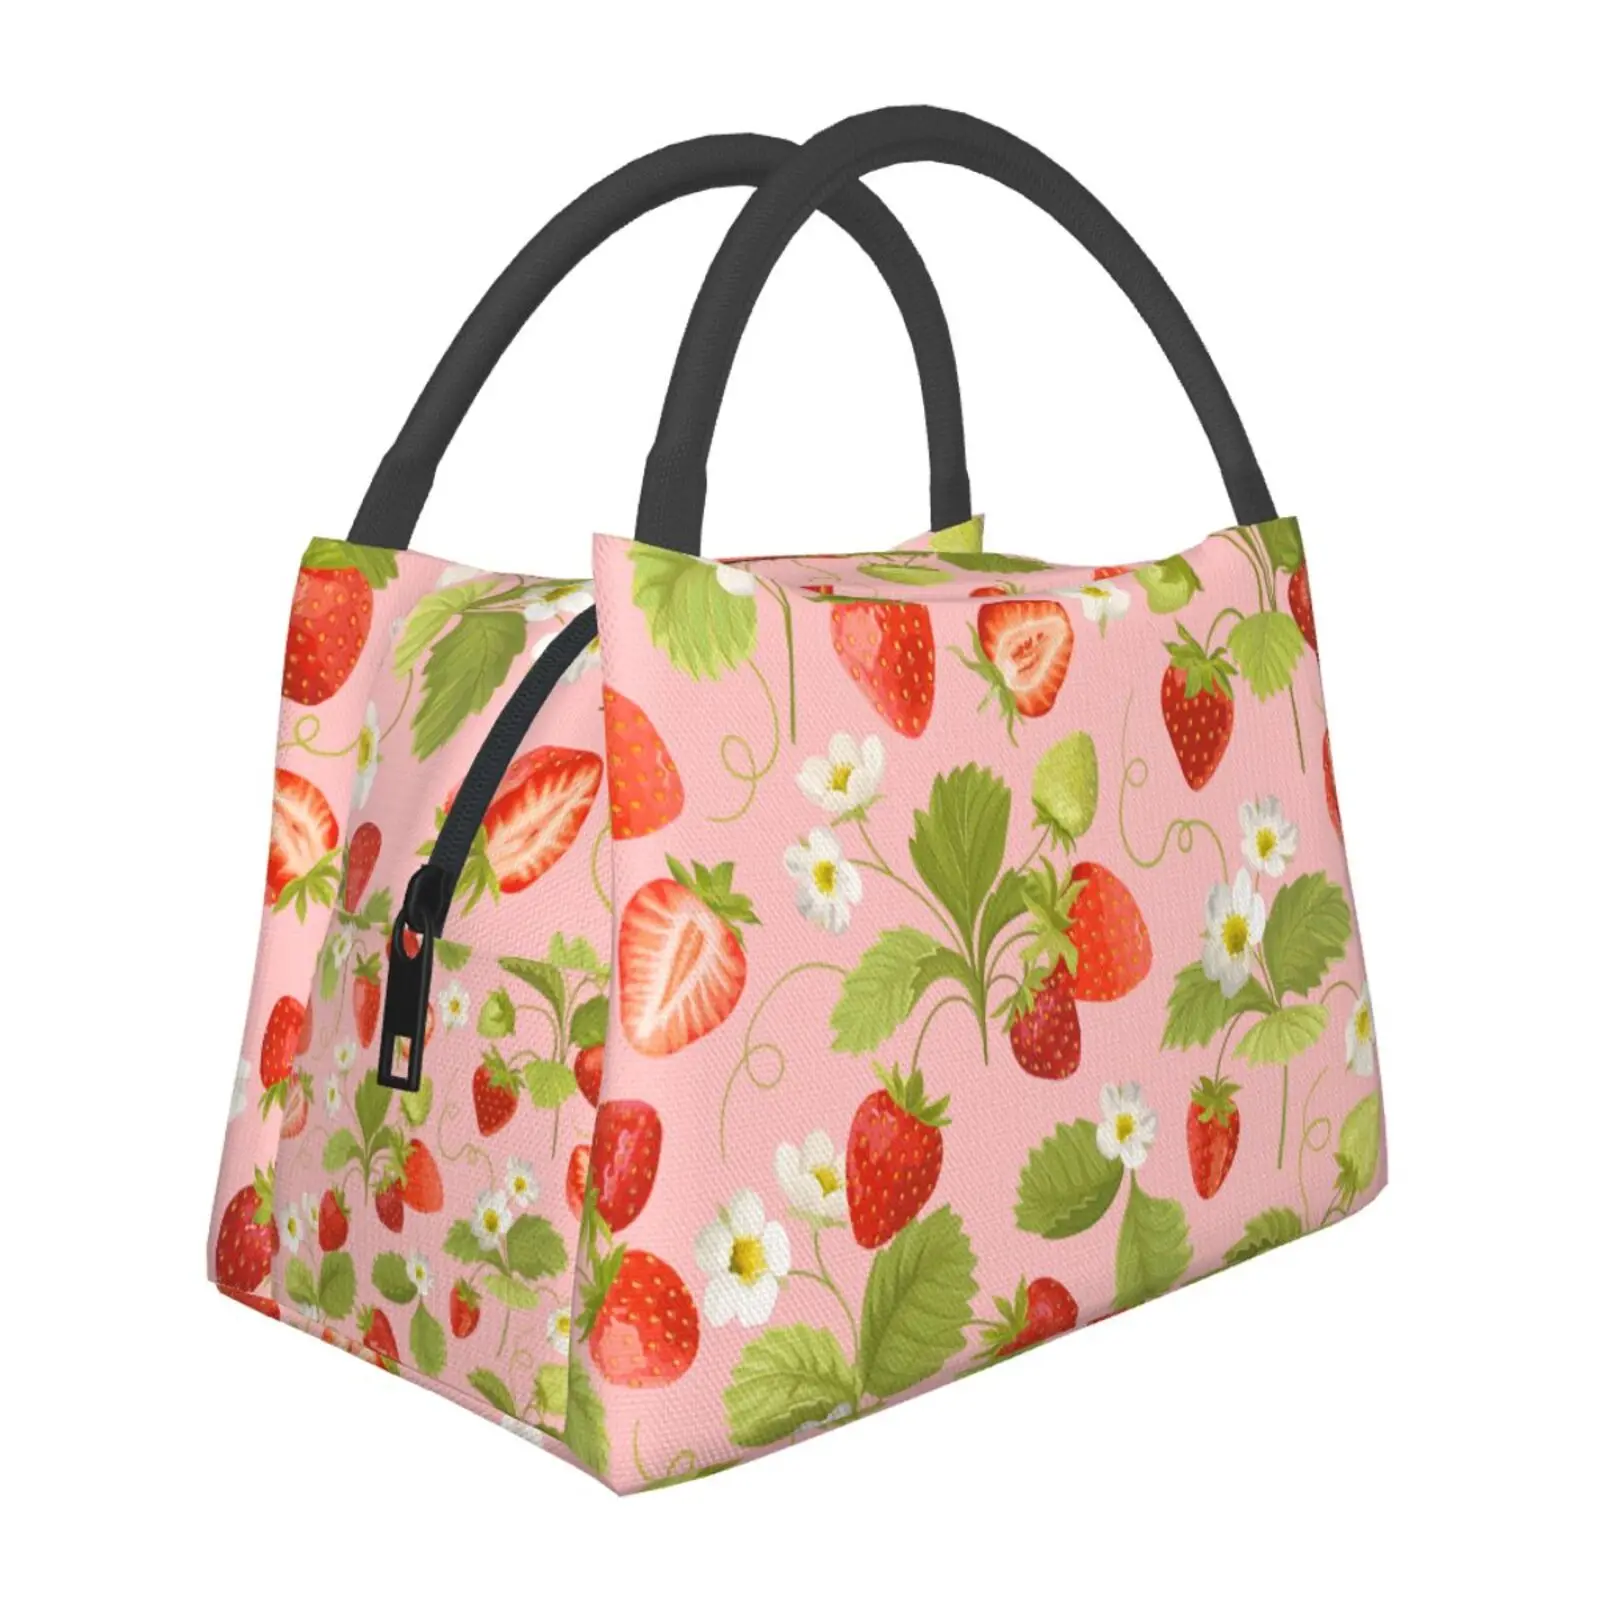 Cute Strawberry Lunch Bag Lunch Containers Thermos for Food Lunch Box for Teen Girls School Work Travel Picnic Medium Bento Bags